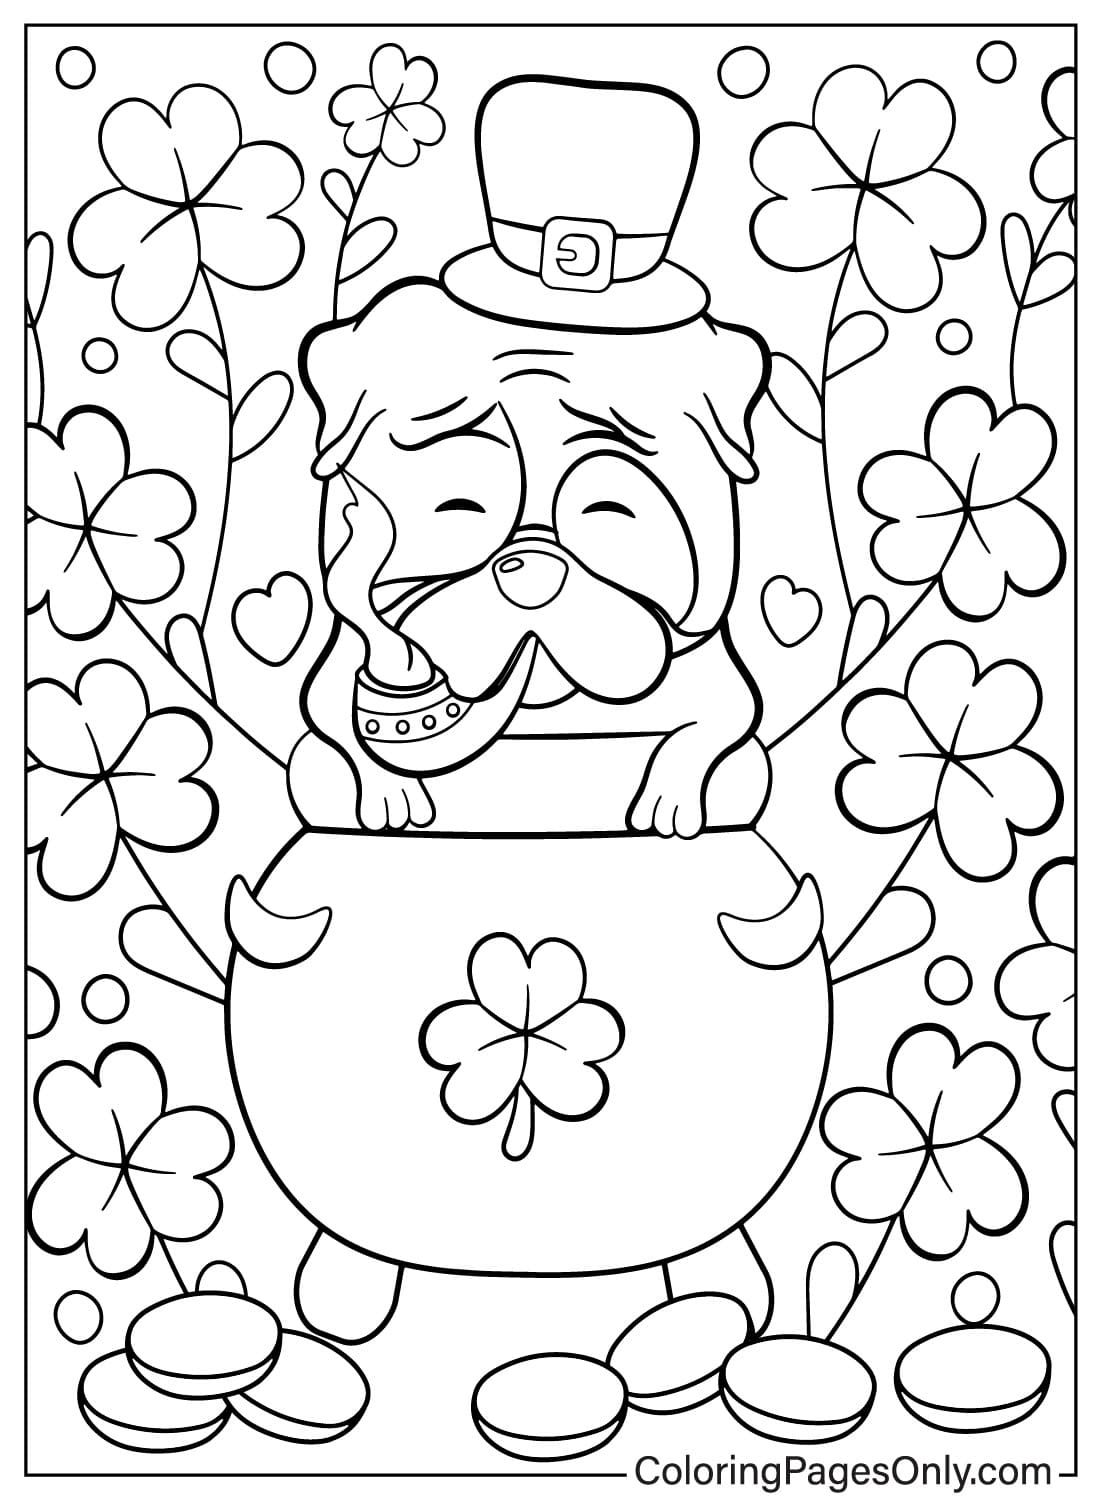 20 Lucky Charms Coloring Pages ColoringPagesOnly com